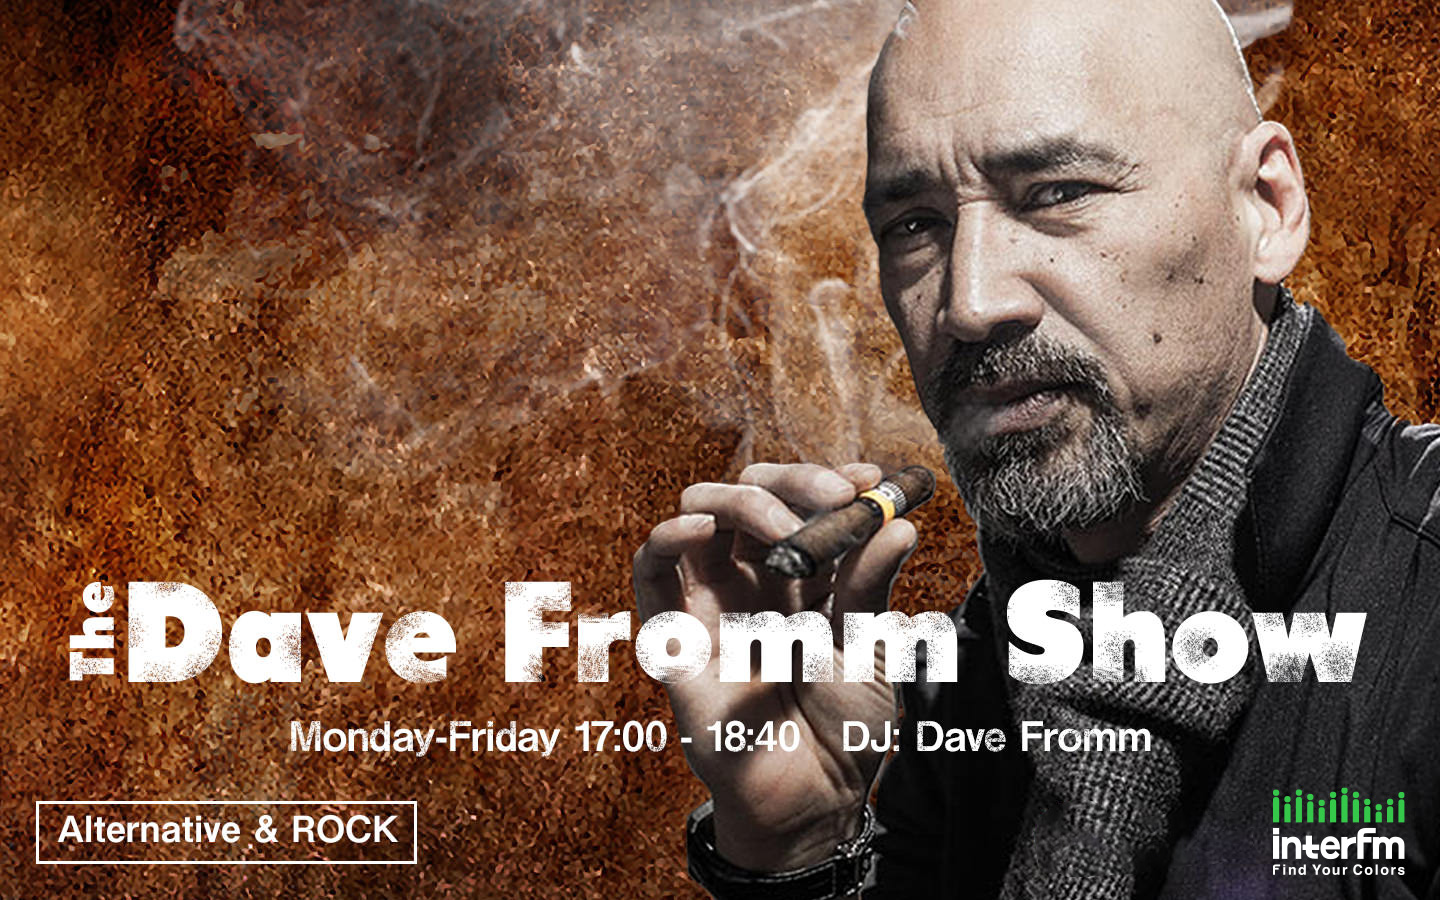 The Dave Fromm Show